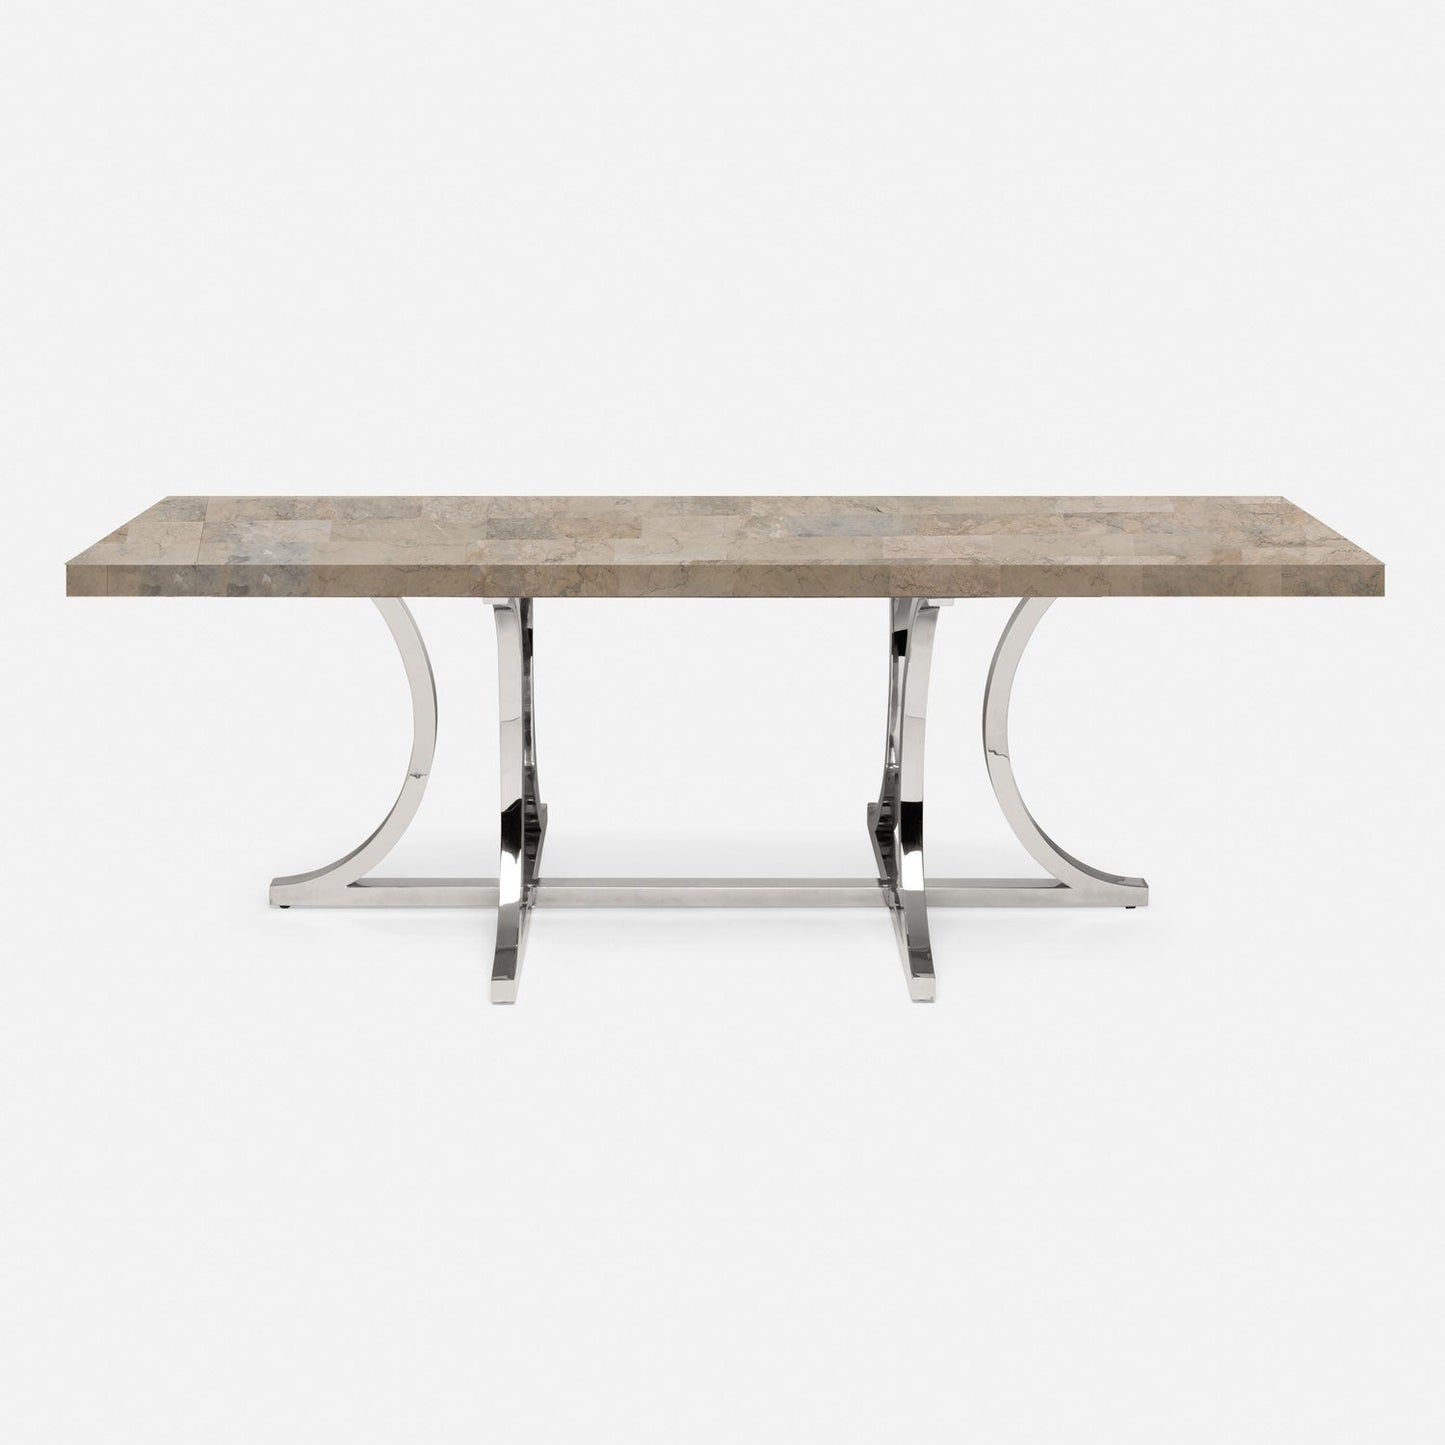 Made Goods Leighton 110" x 40" x 30" Polished Silver Steel Dinning Table With Rectangle Warm Gray Marble Table Top